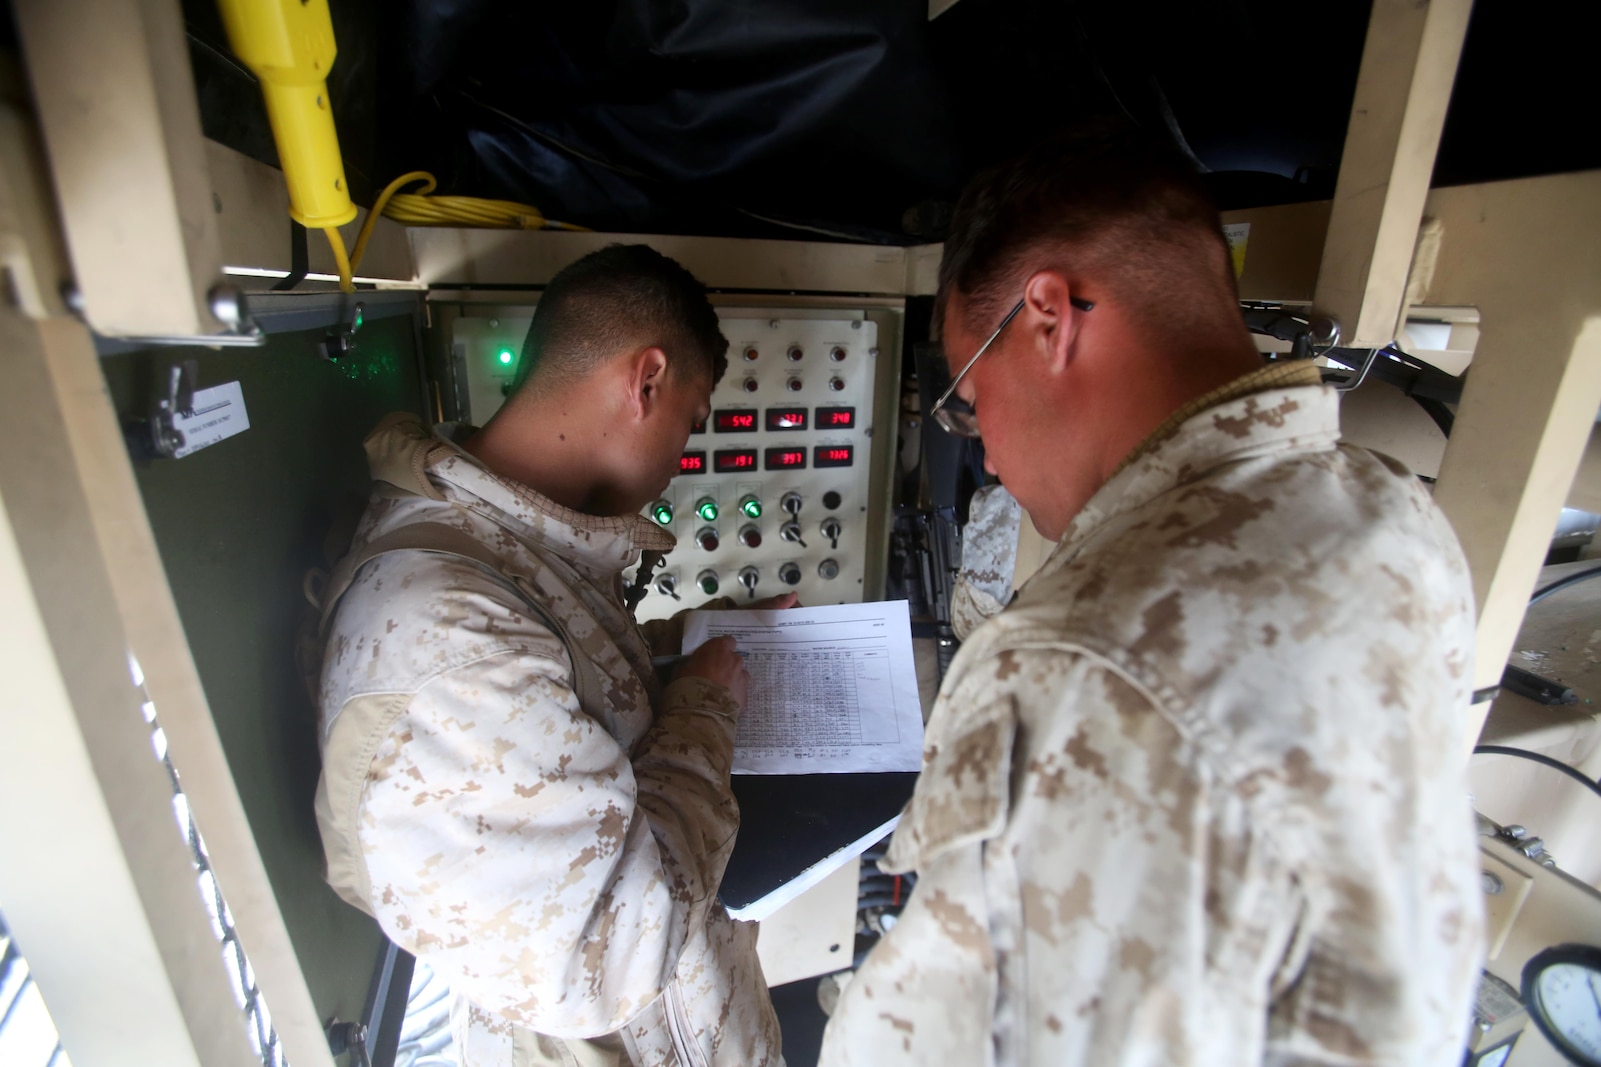 Private First Class Daniel Bonilla and Lance Cpl. Tyler Schneider, both water support technicians with Utilities Platoon, Headquarters and Support Company, 7th Engineer Support Battalion, 1st Marine Logistics Group, operate a tactical water purification system during a utilities exercise at Red Beach aboard Camp Pendleton, Calif., March 21, 2016. Utilities Platoon conducted an eight-day field exercise which focused on their ability to provide clean water and stable power to a unit located in an environment without standard utility resources. (U.S. Marine Corps photo by Cpl. Carson Gramley/released)